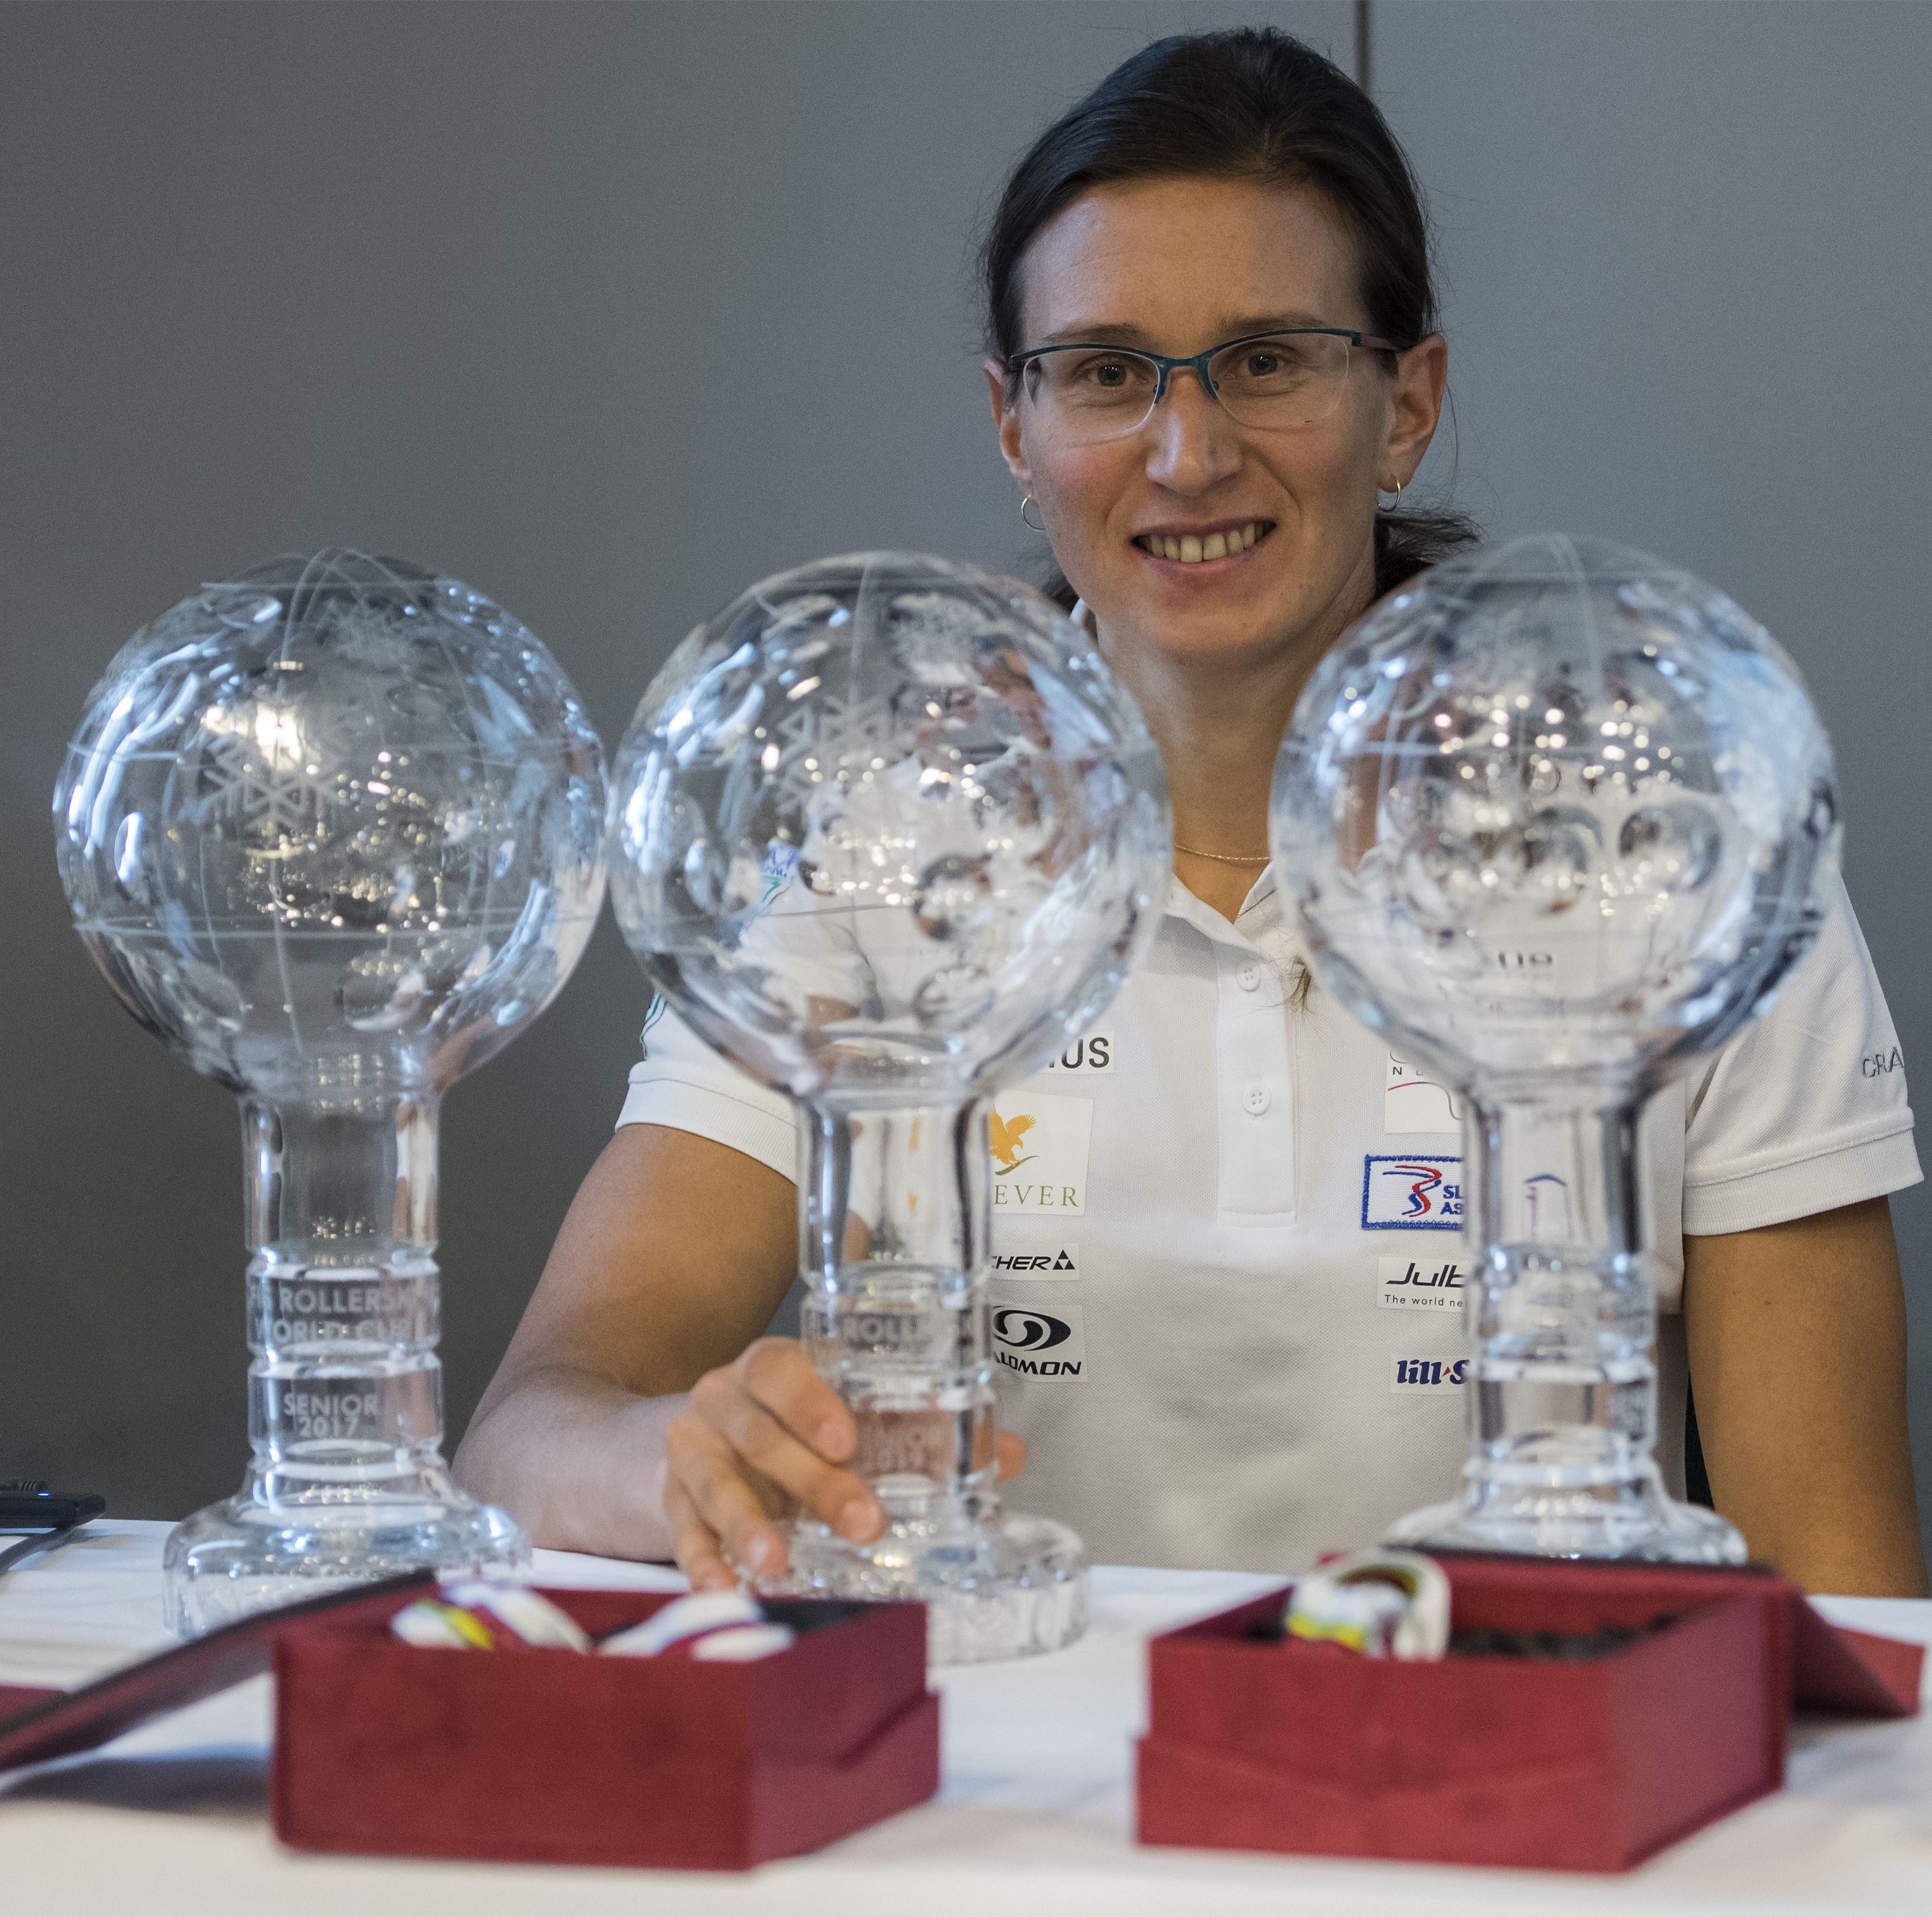 Alena with her trophies of glory